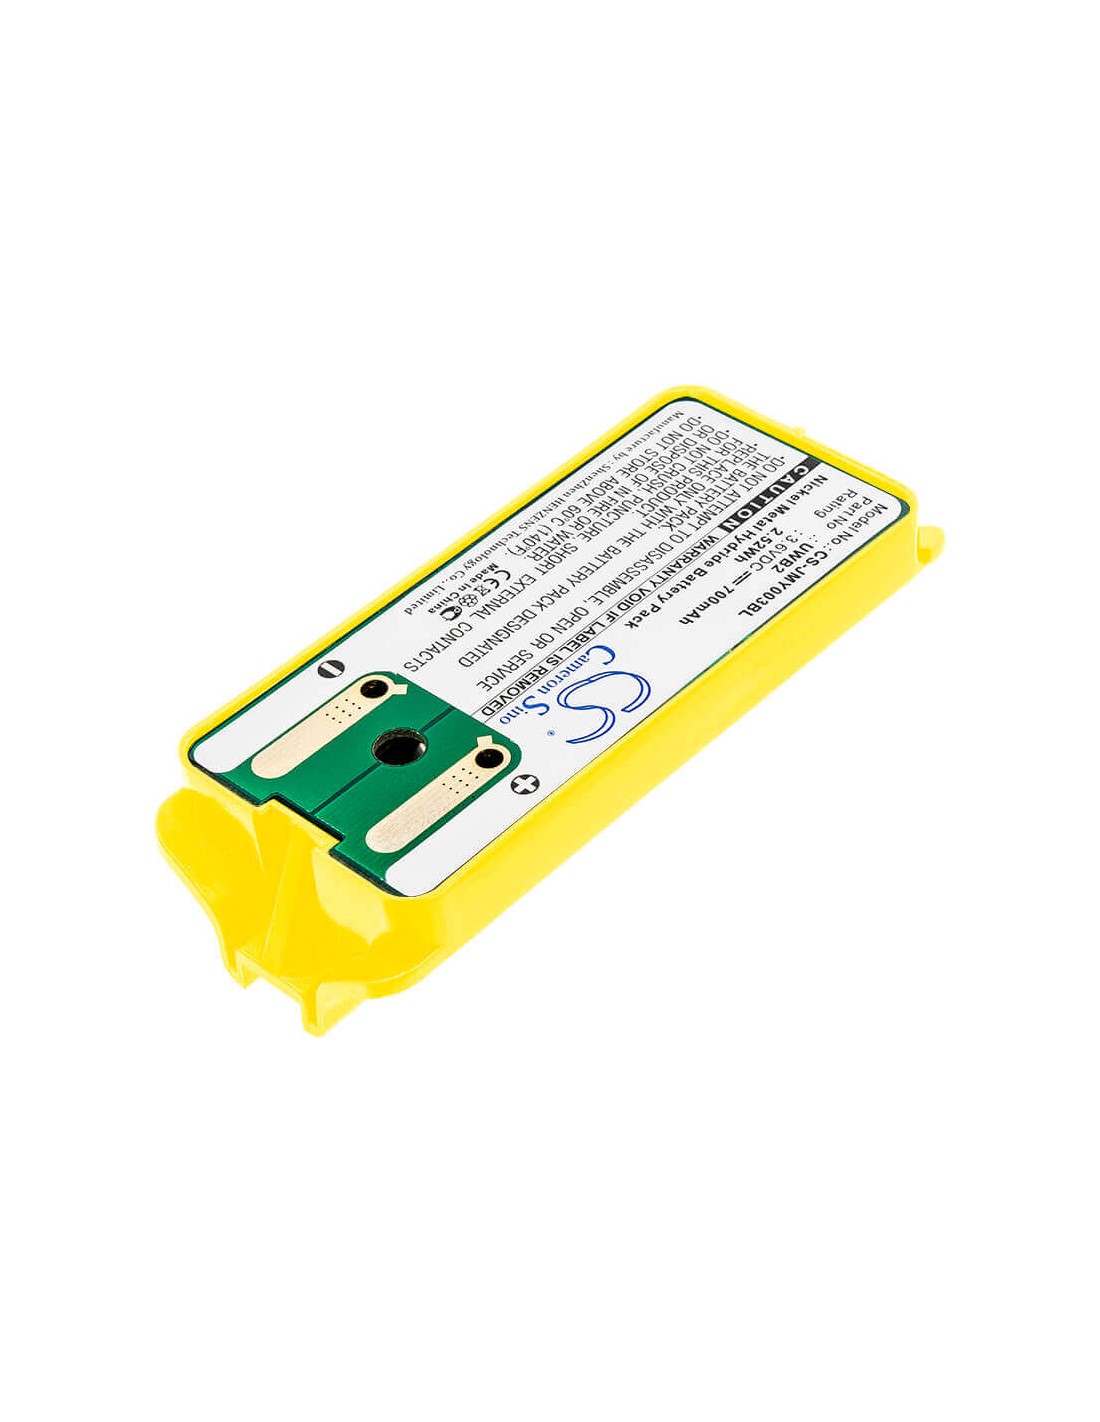 Battery for Jay, A003 Has, Modular Industrial Radio Remote Control 3.6V, 700mAh - 2.52Wh